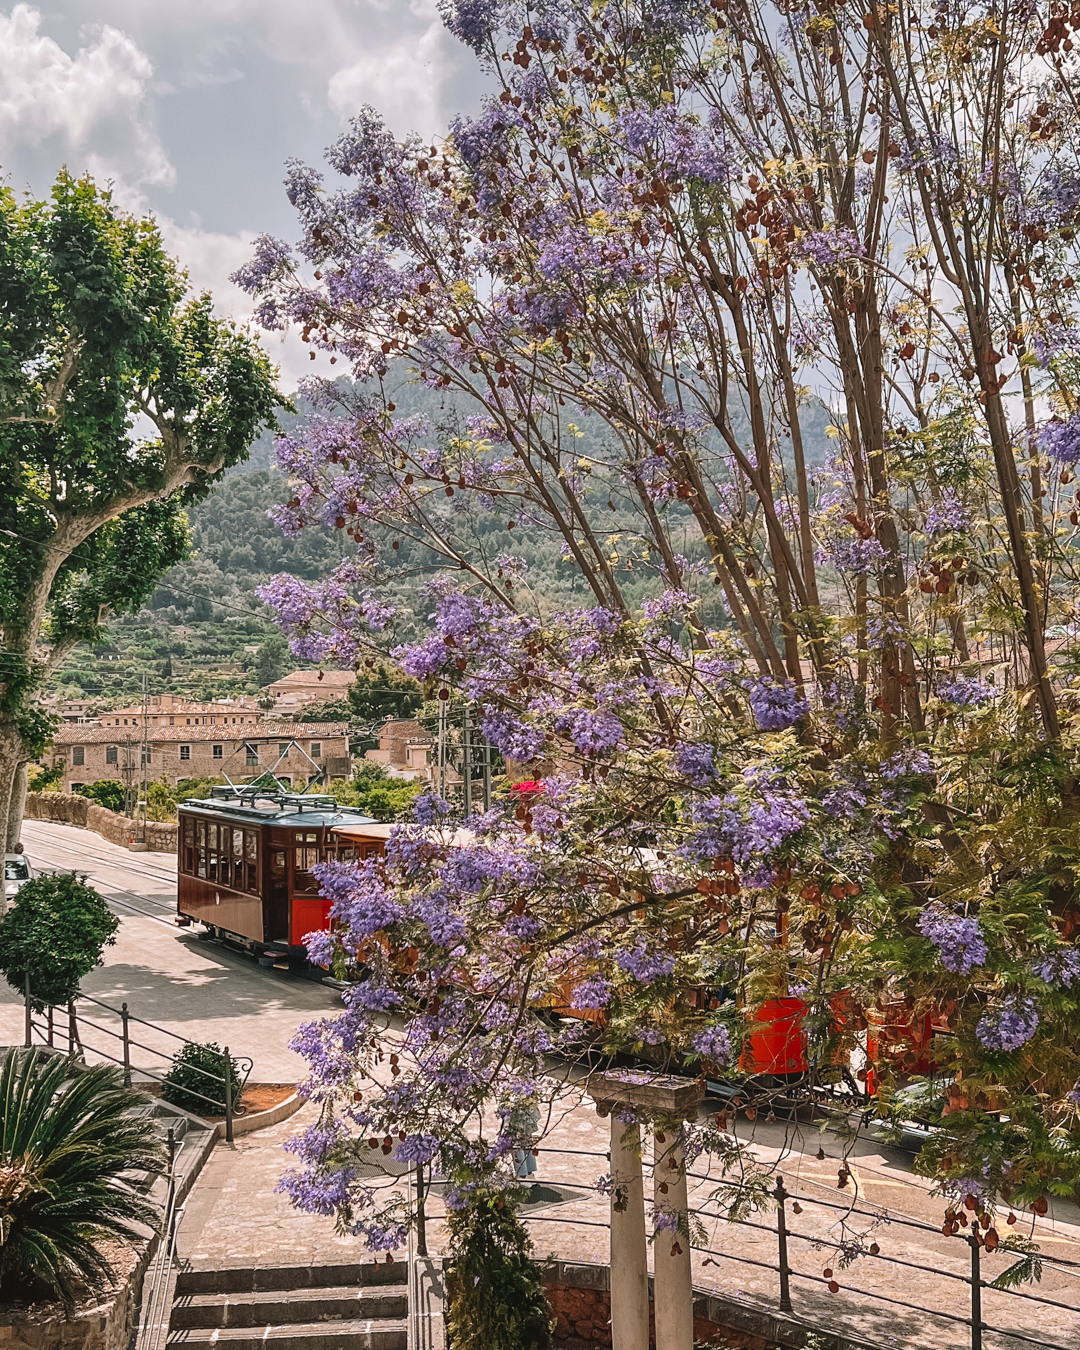 Take the vintage train to Soller